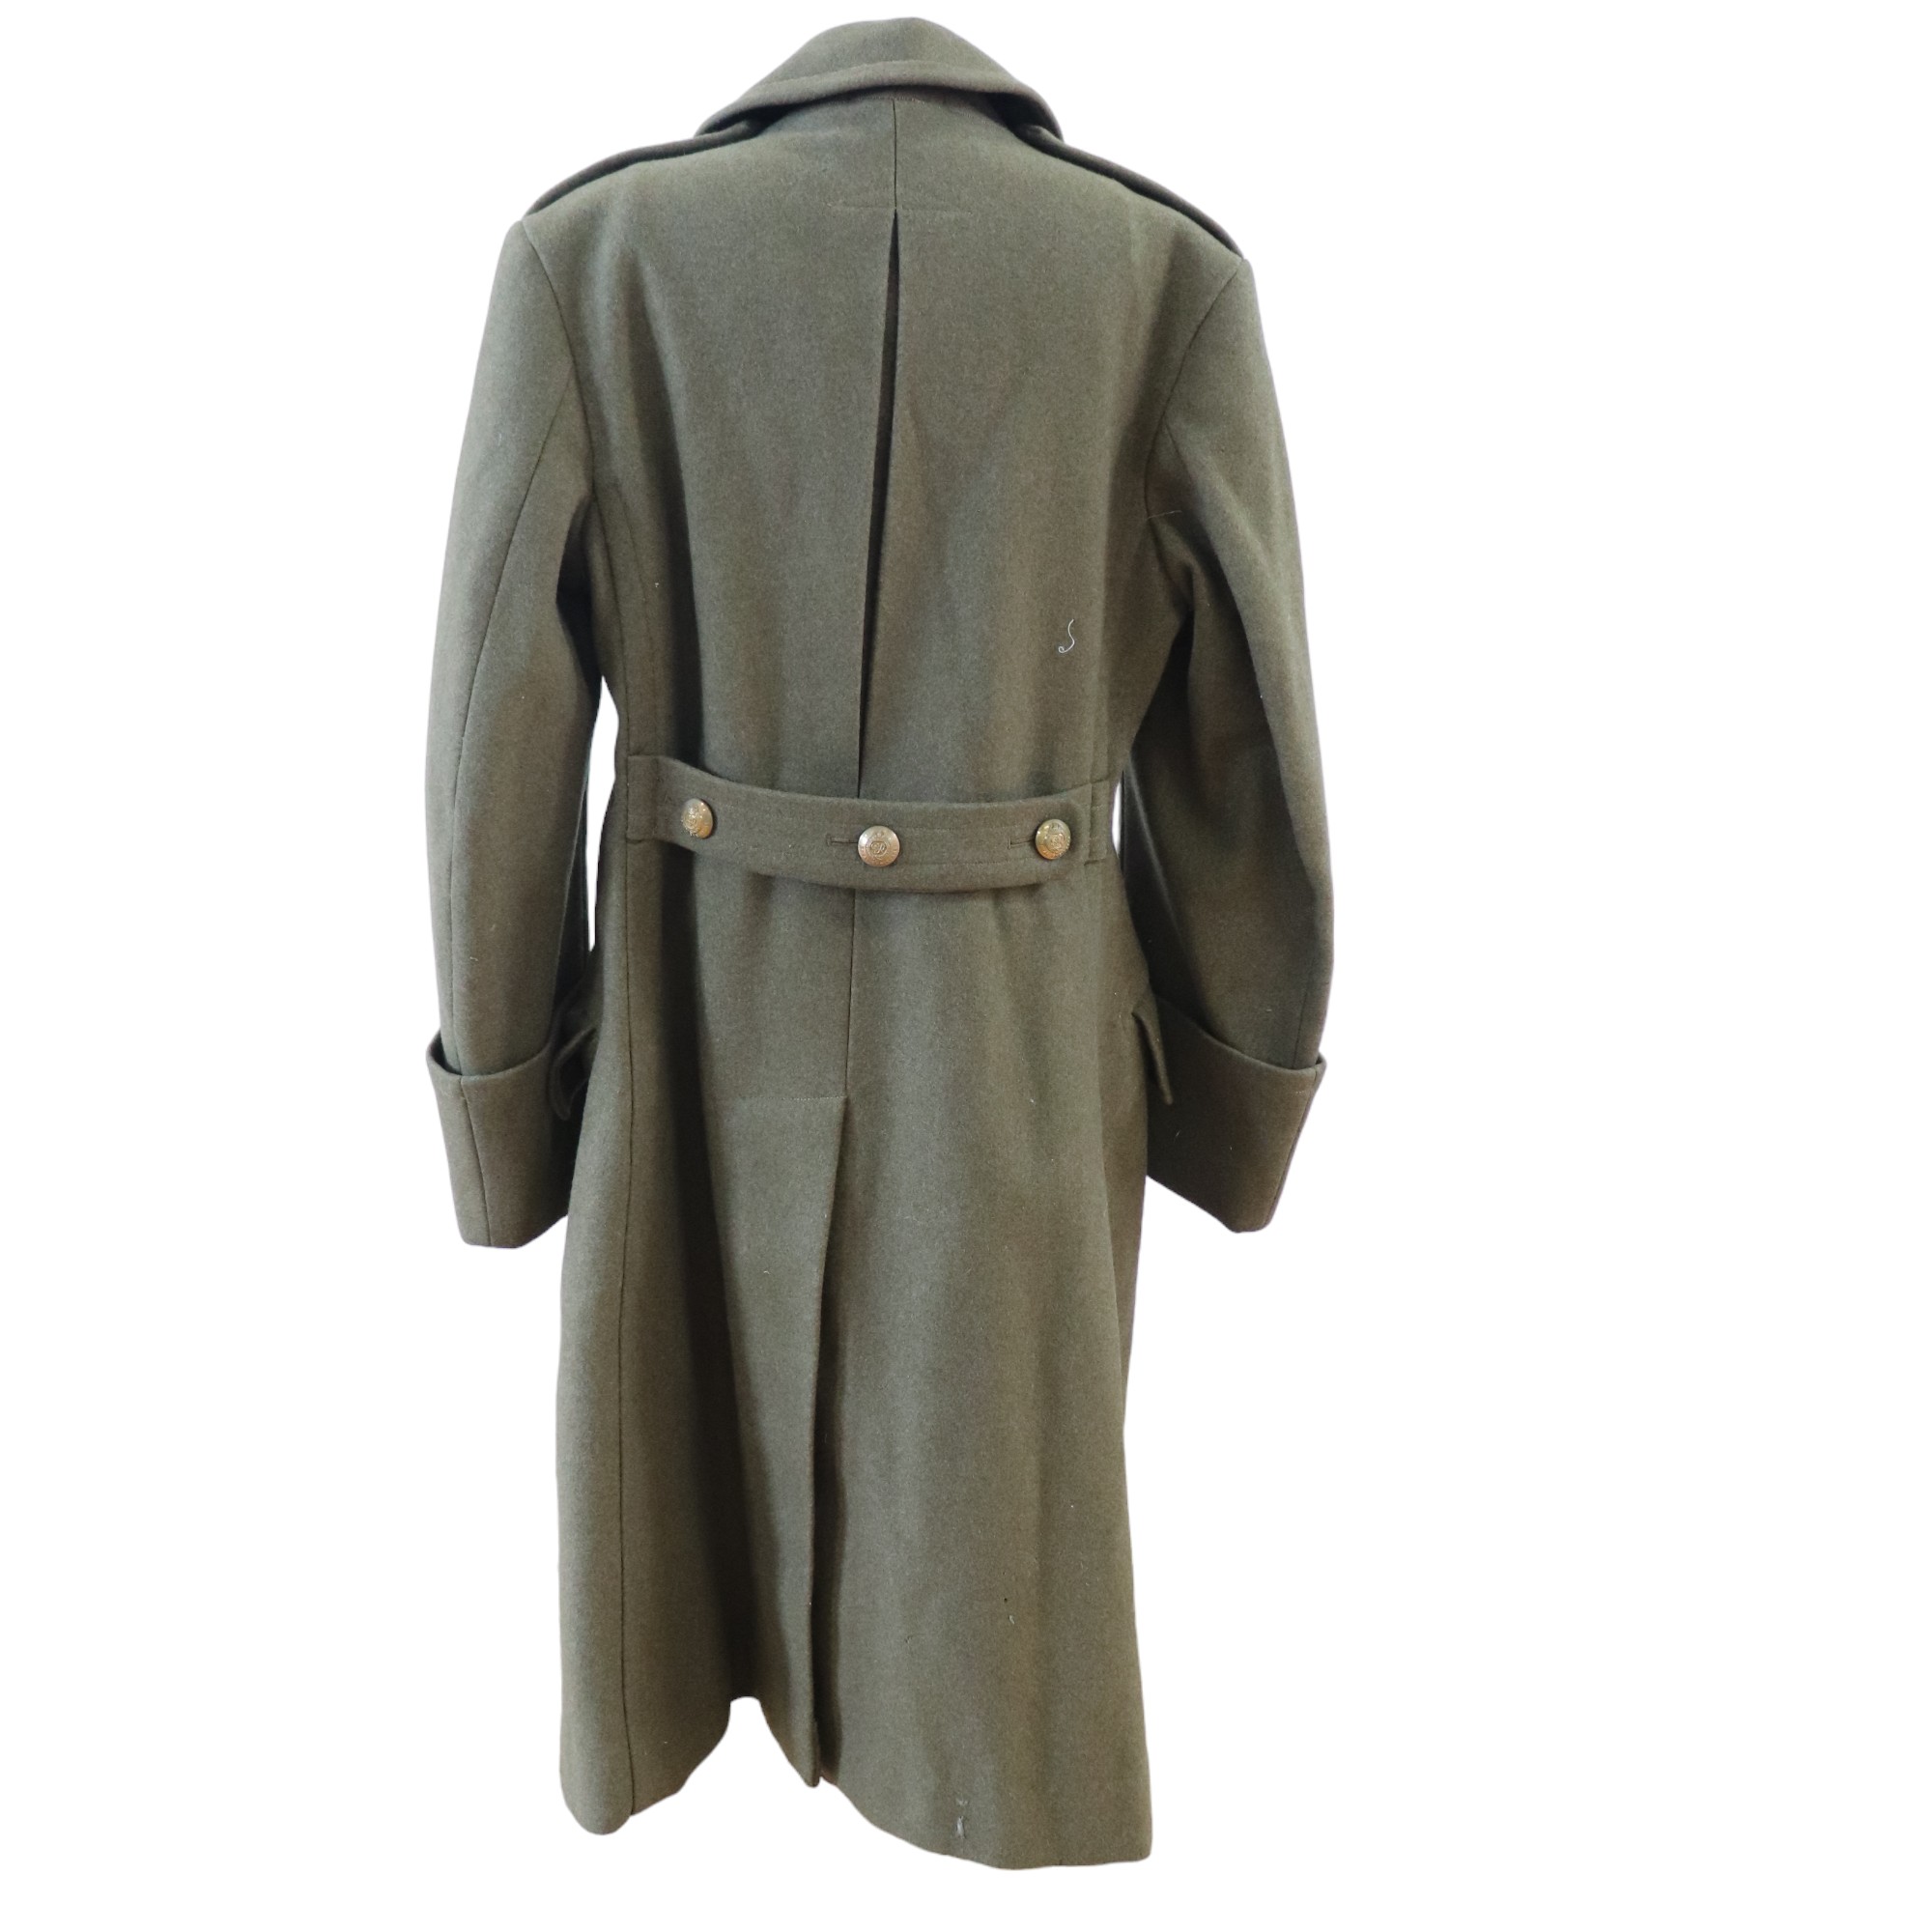 A 1943 dated army officer's greatcoat - Image 3 of 5